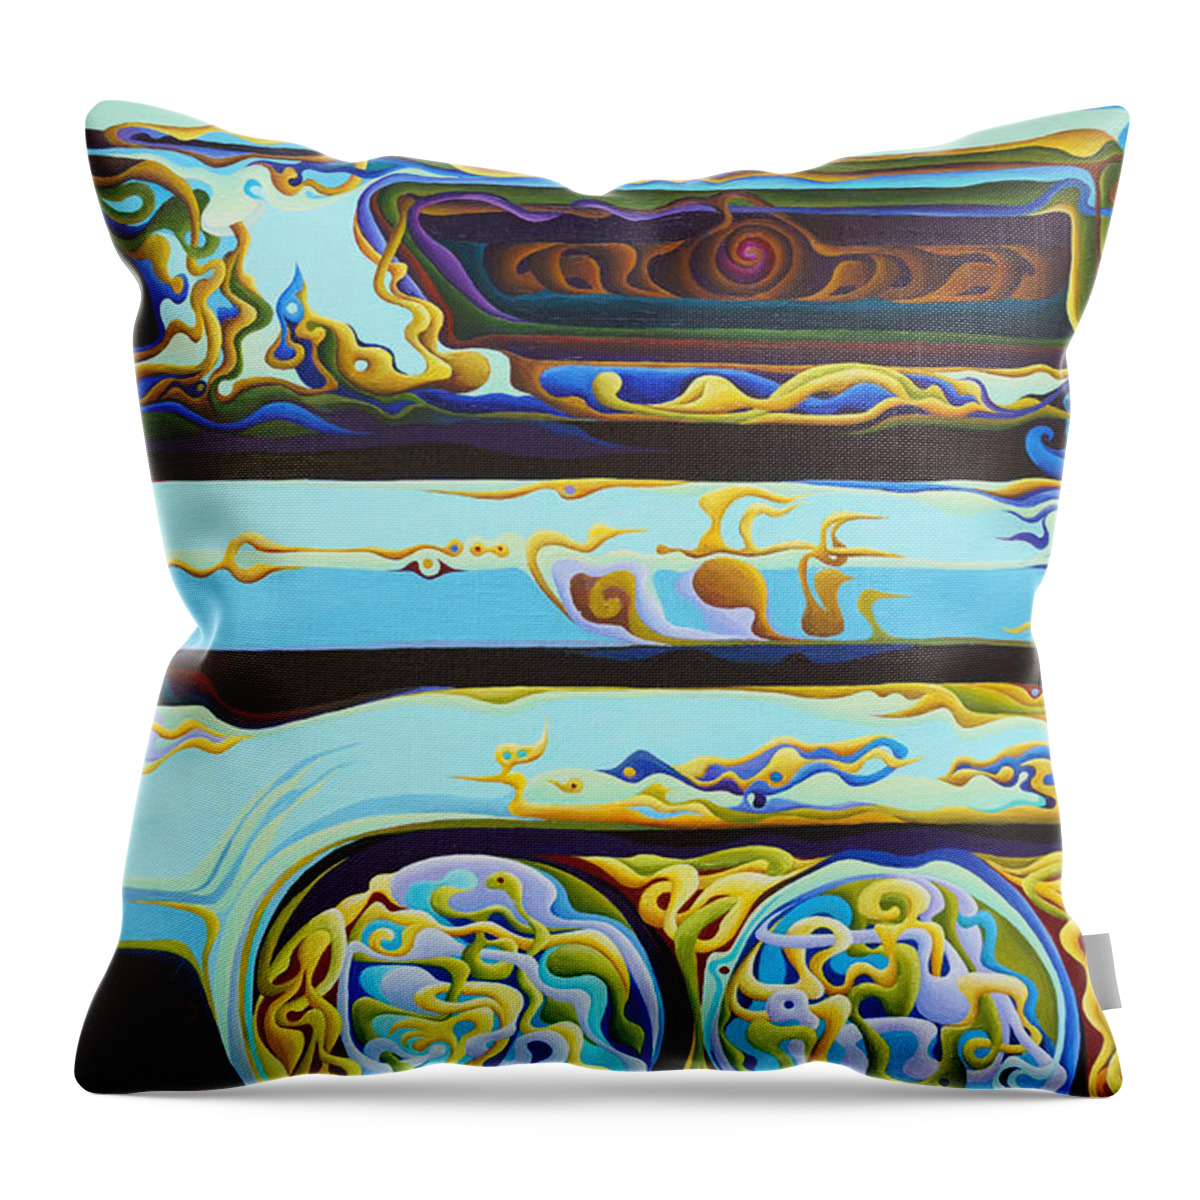 Woo Hoo Throw Pillow featuring the painting WooHooxidaisical Corrustination by Amy Ferrari